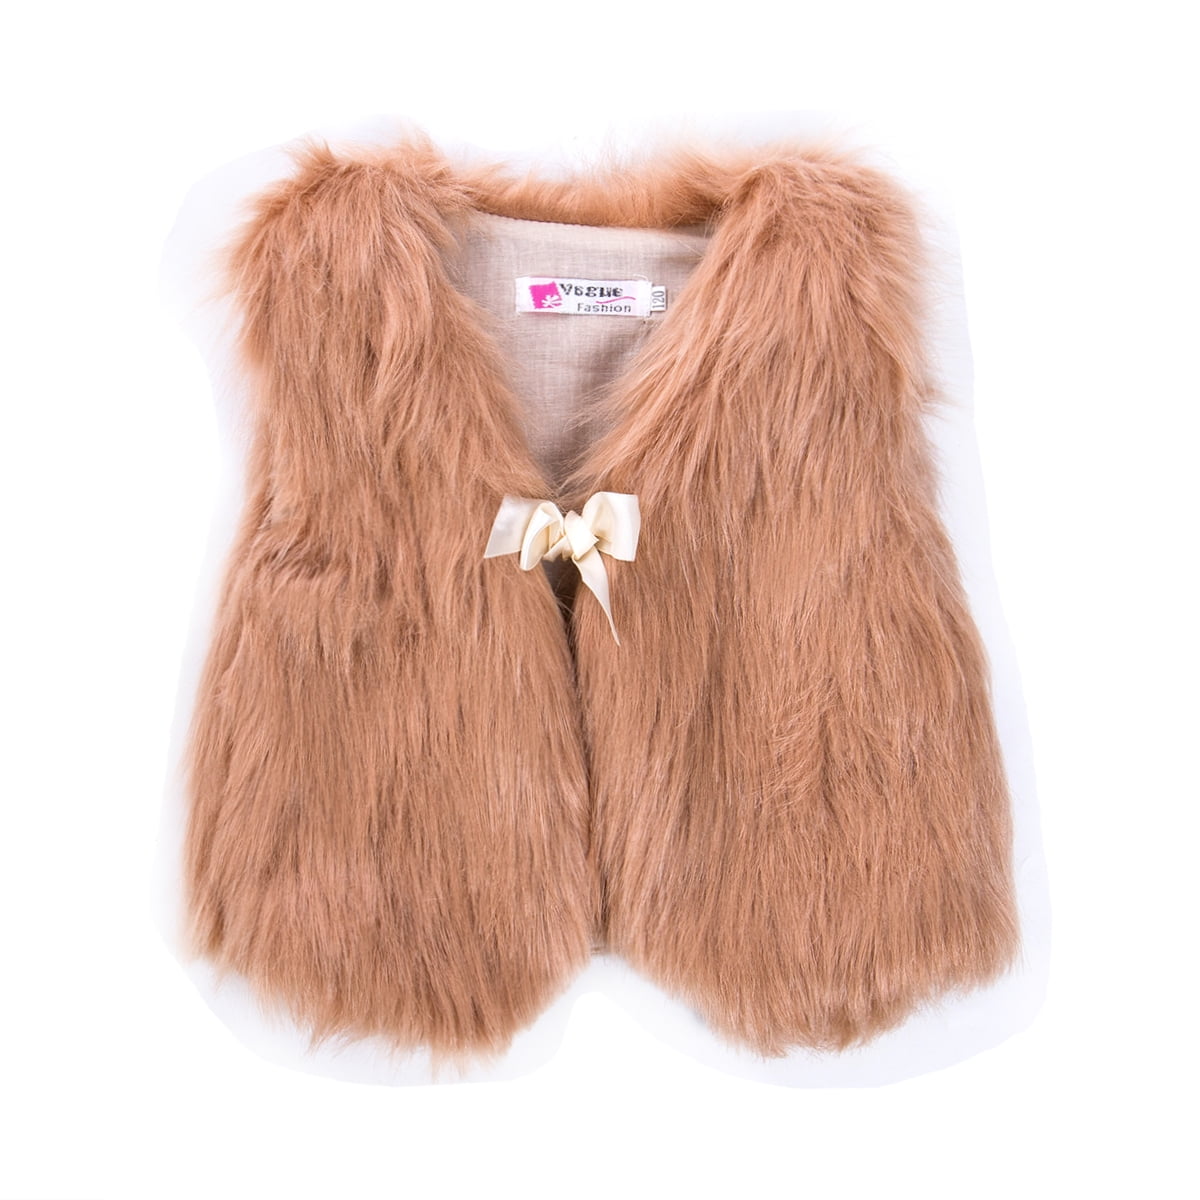 OutTop Toddler Baby Girls Faux Fur Vest Waistcoat Fall Winter Trendy Warm Sleeveless Lightweight Fuzzy Cardigans Jacket 